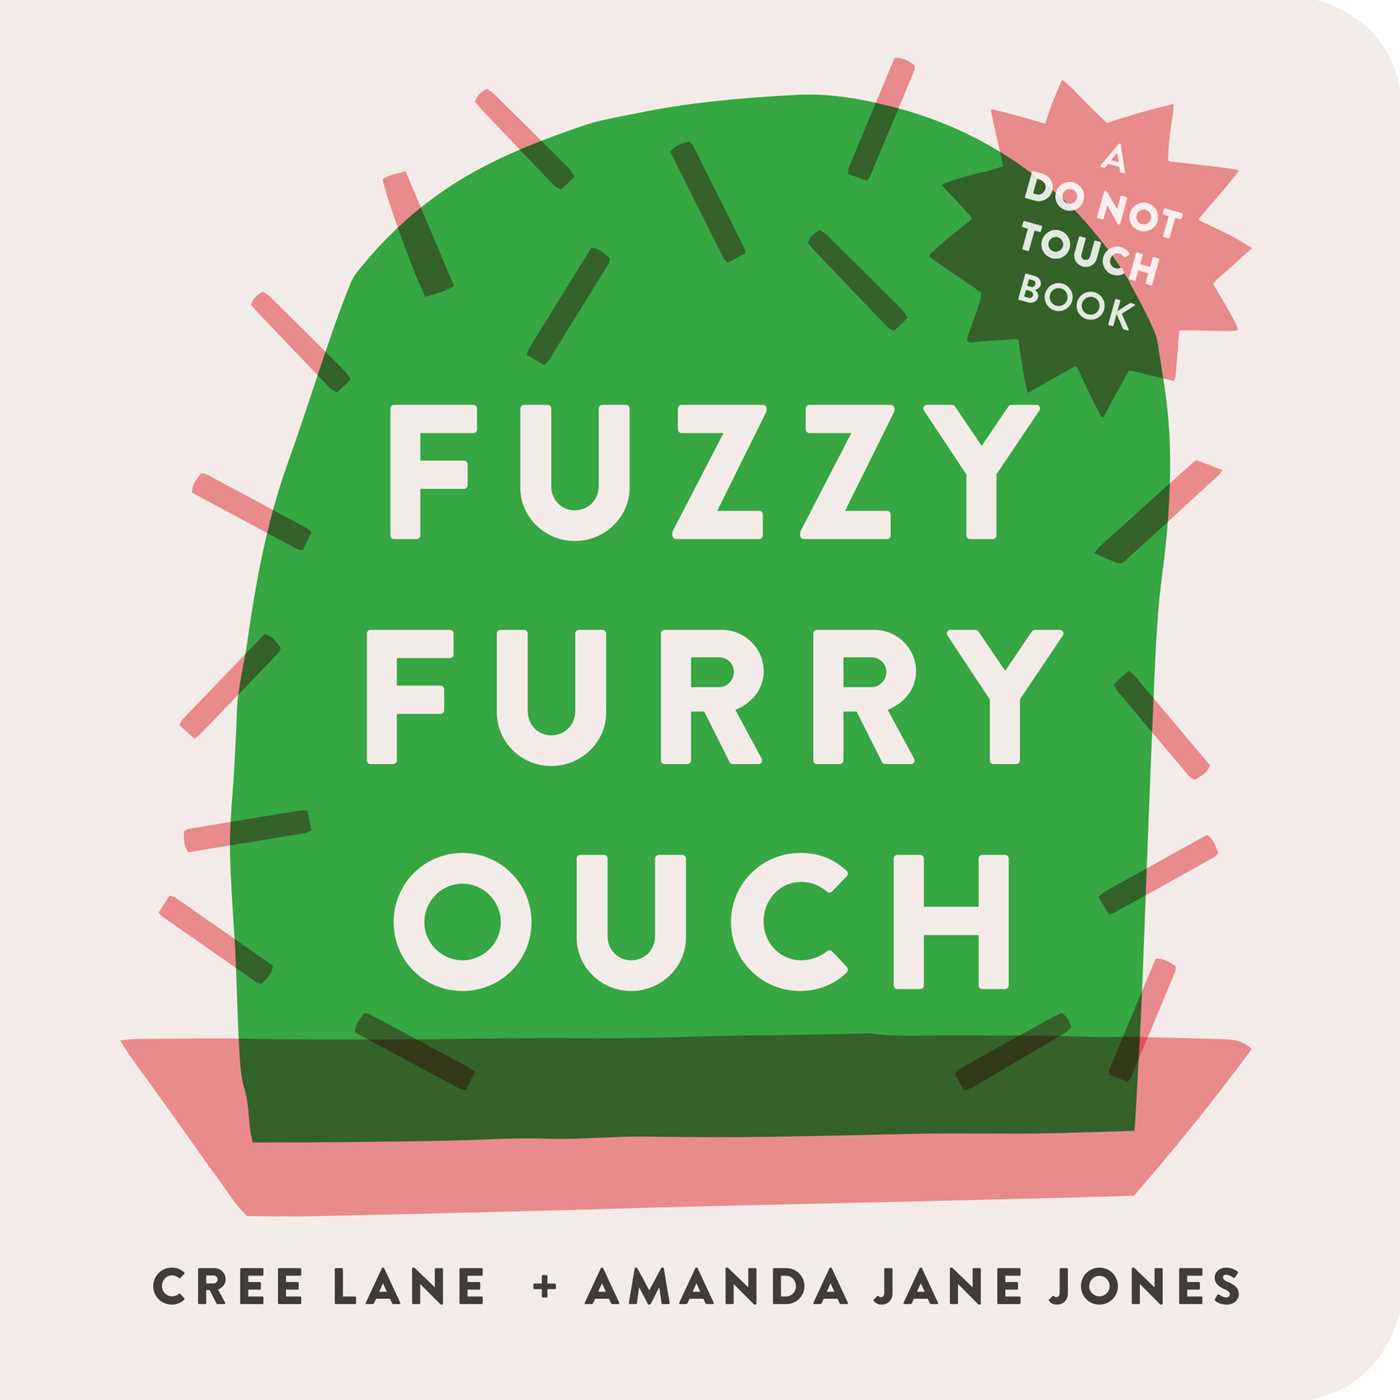 Fuzzy Furry Ouch book cover